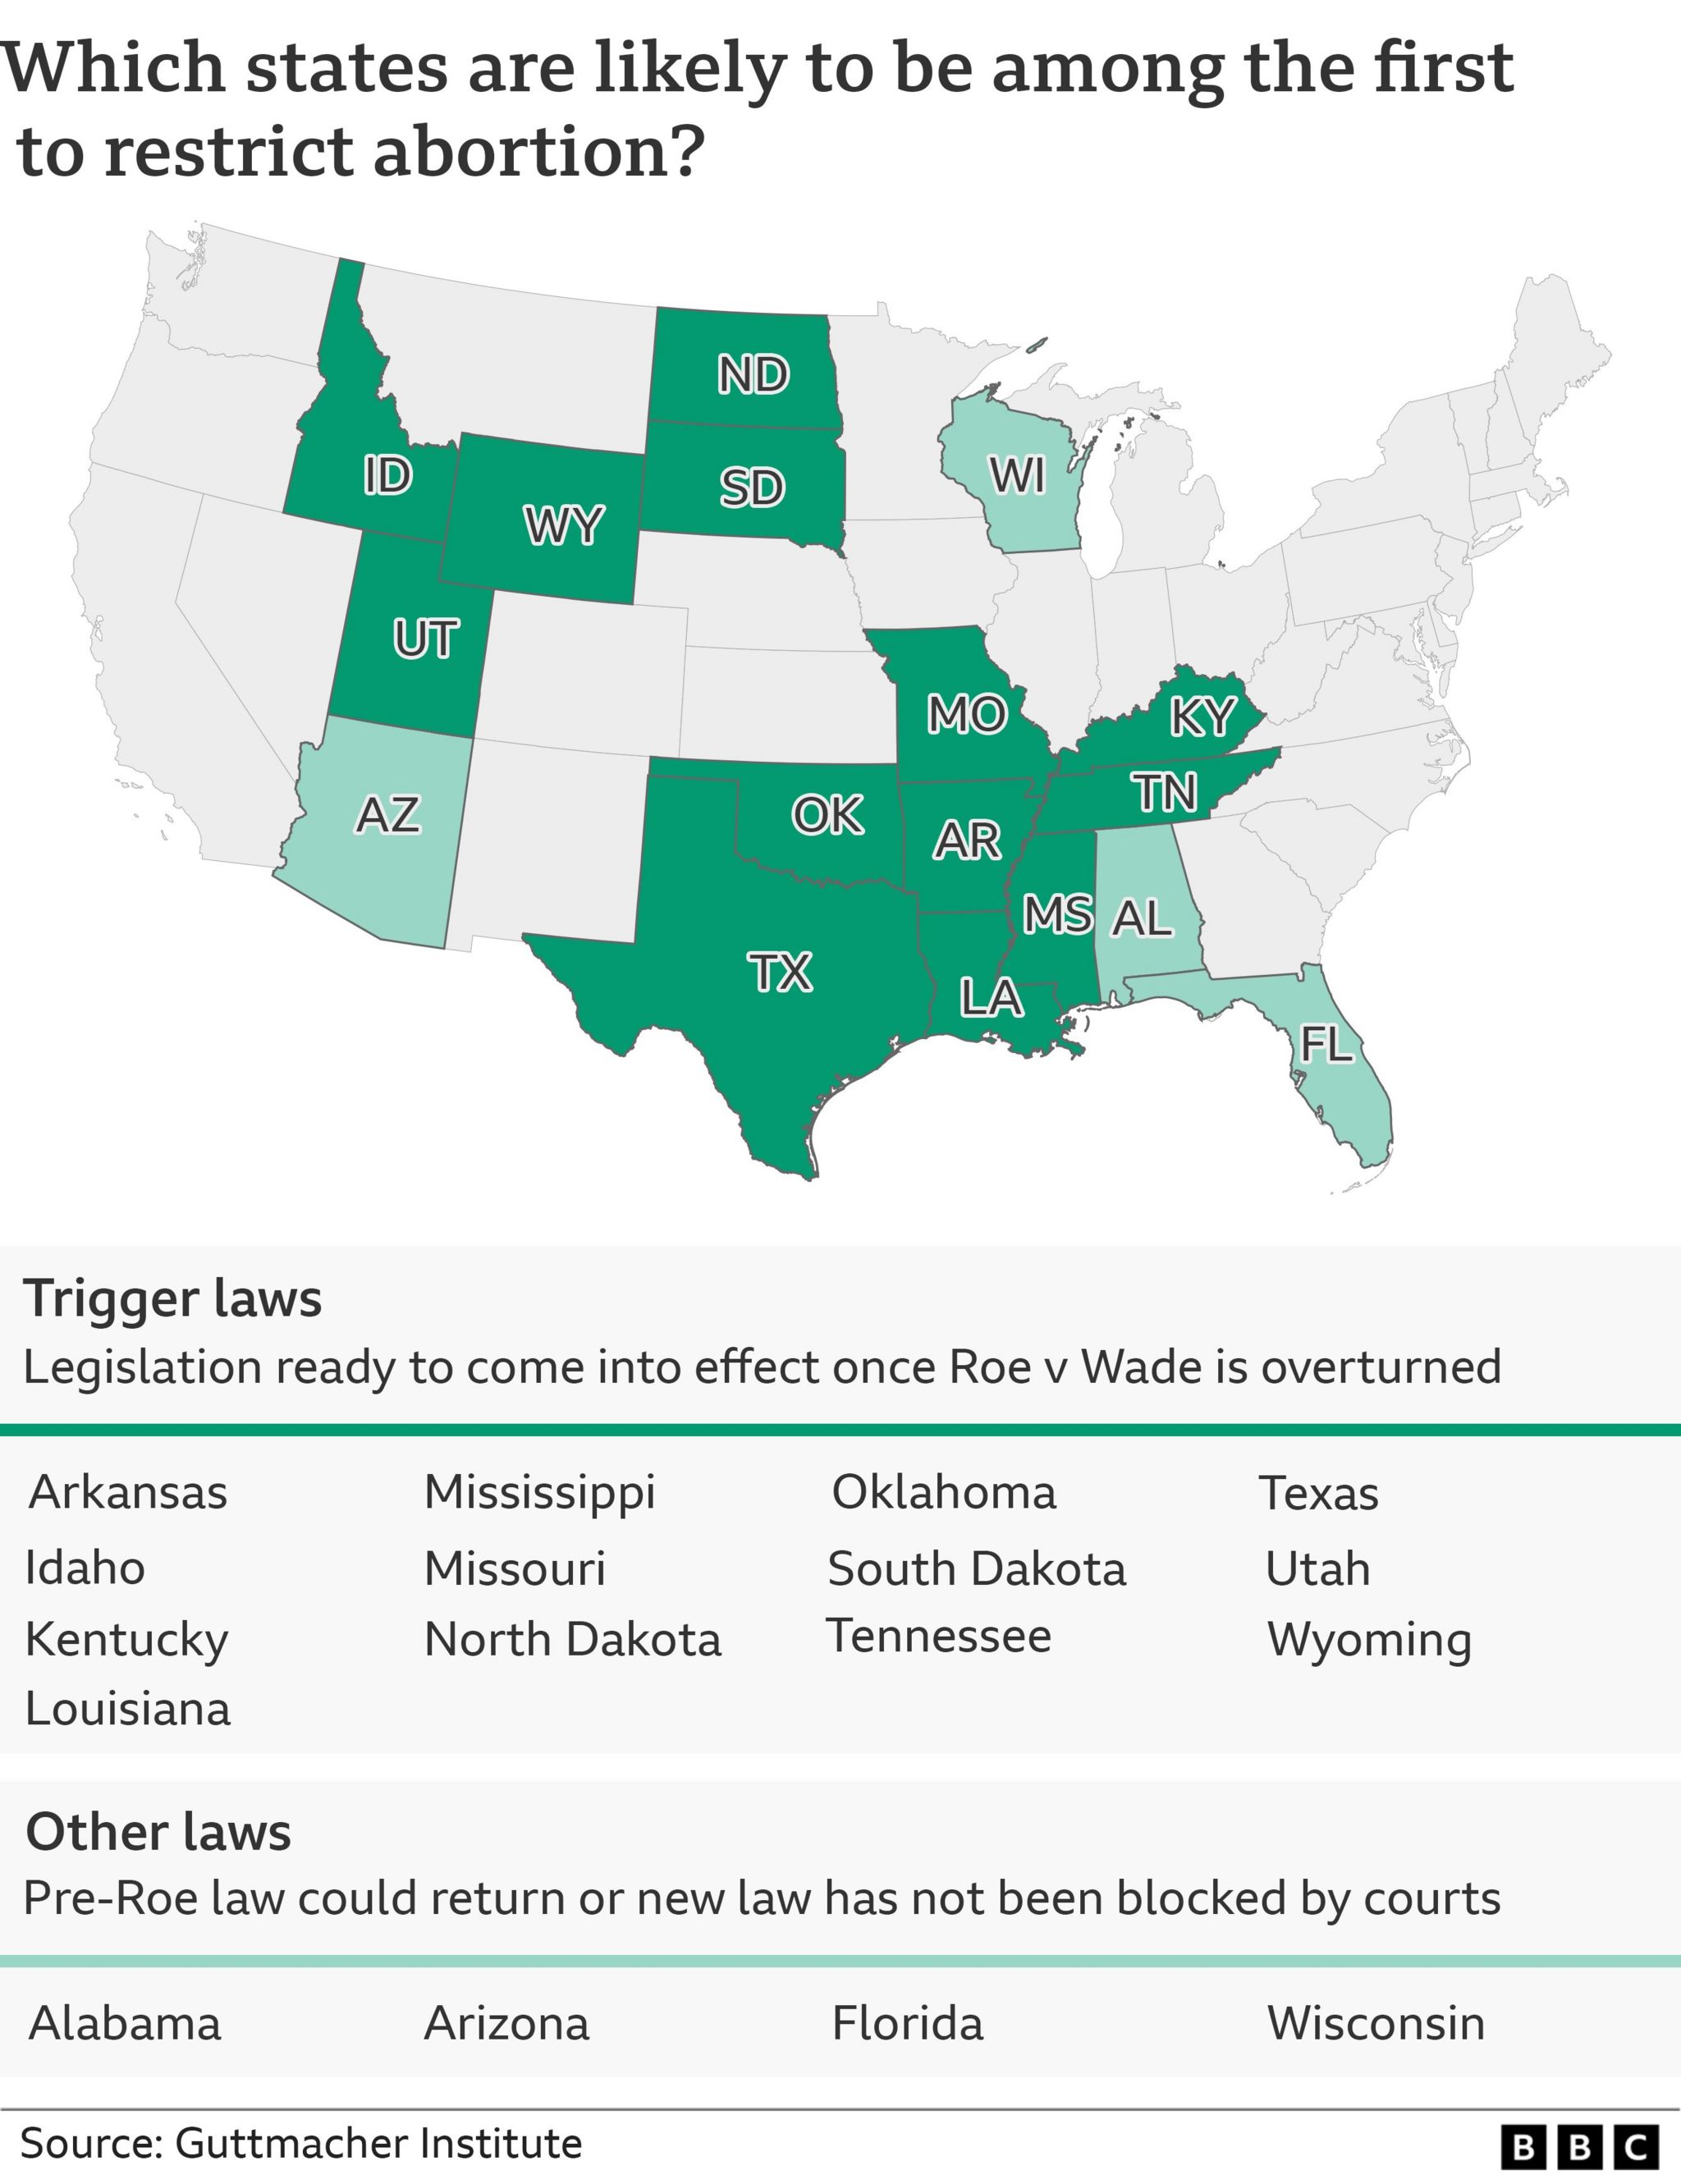 A map shows which states have legislation prepared to affect abortion in the event of Roe v Wade being overturned